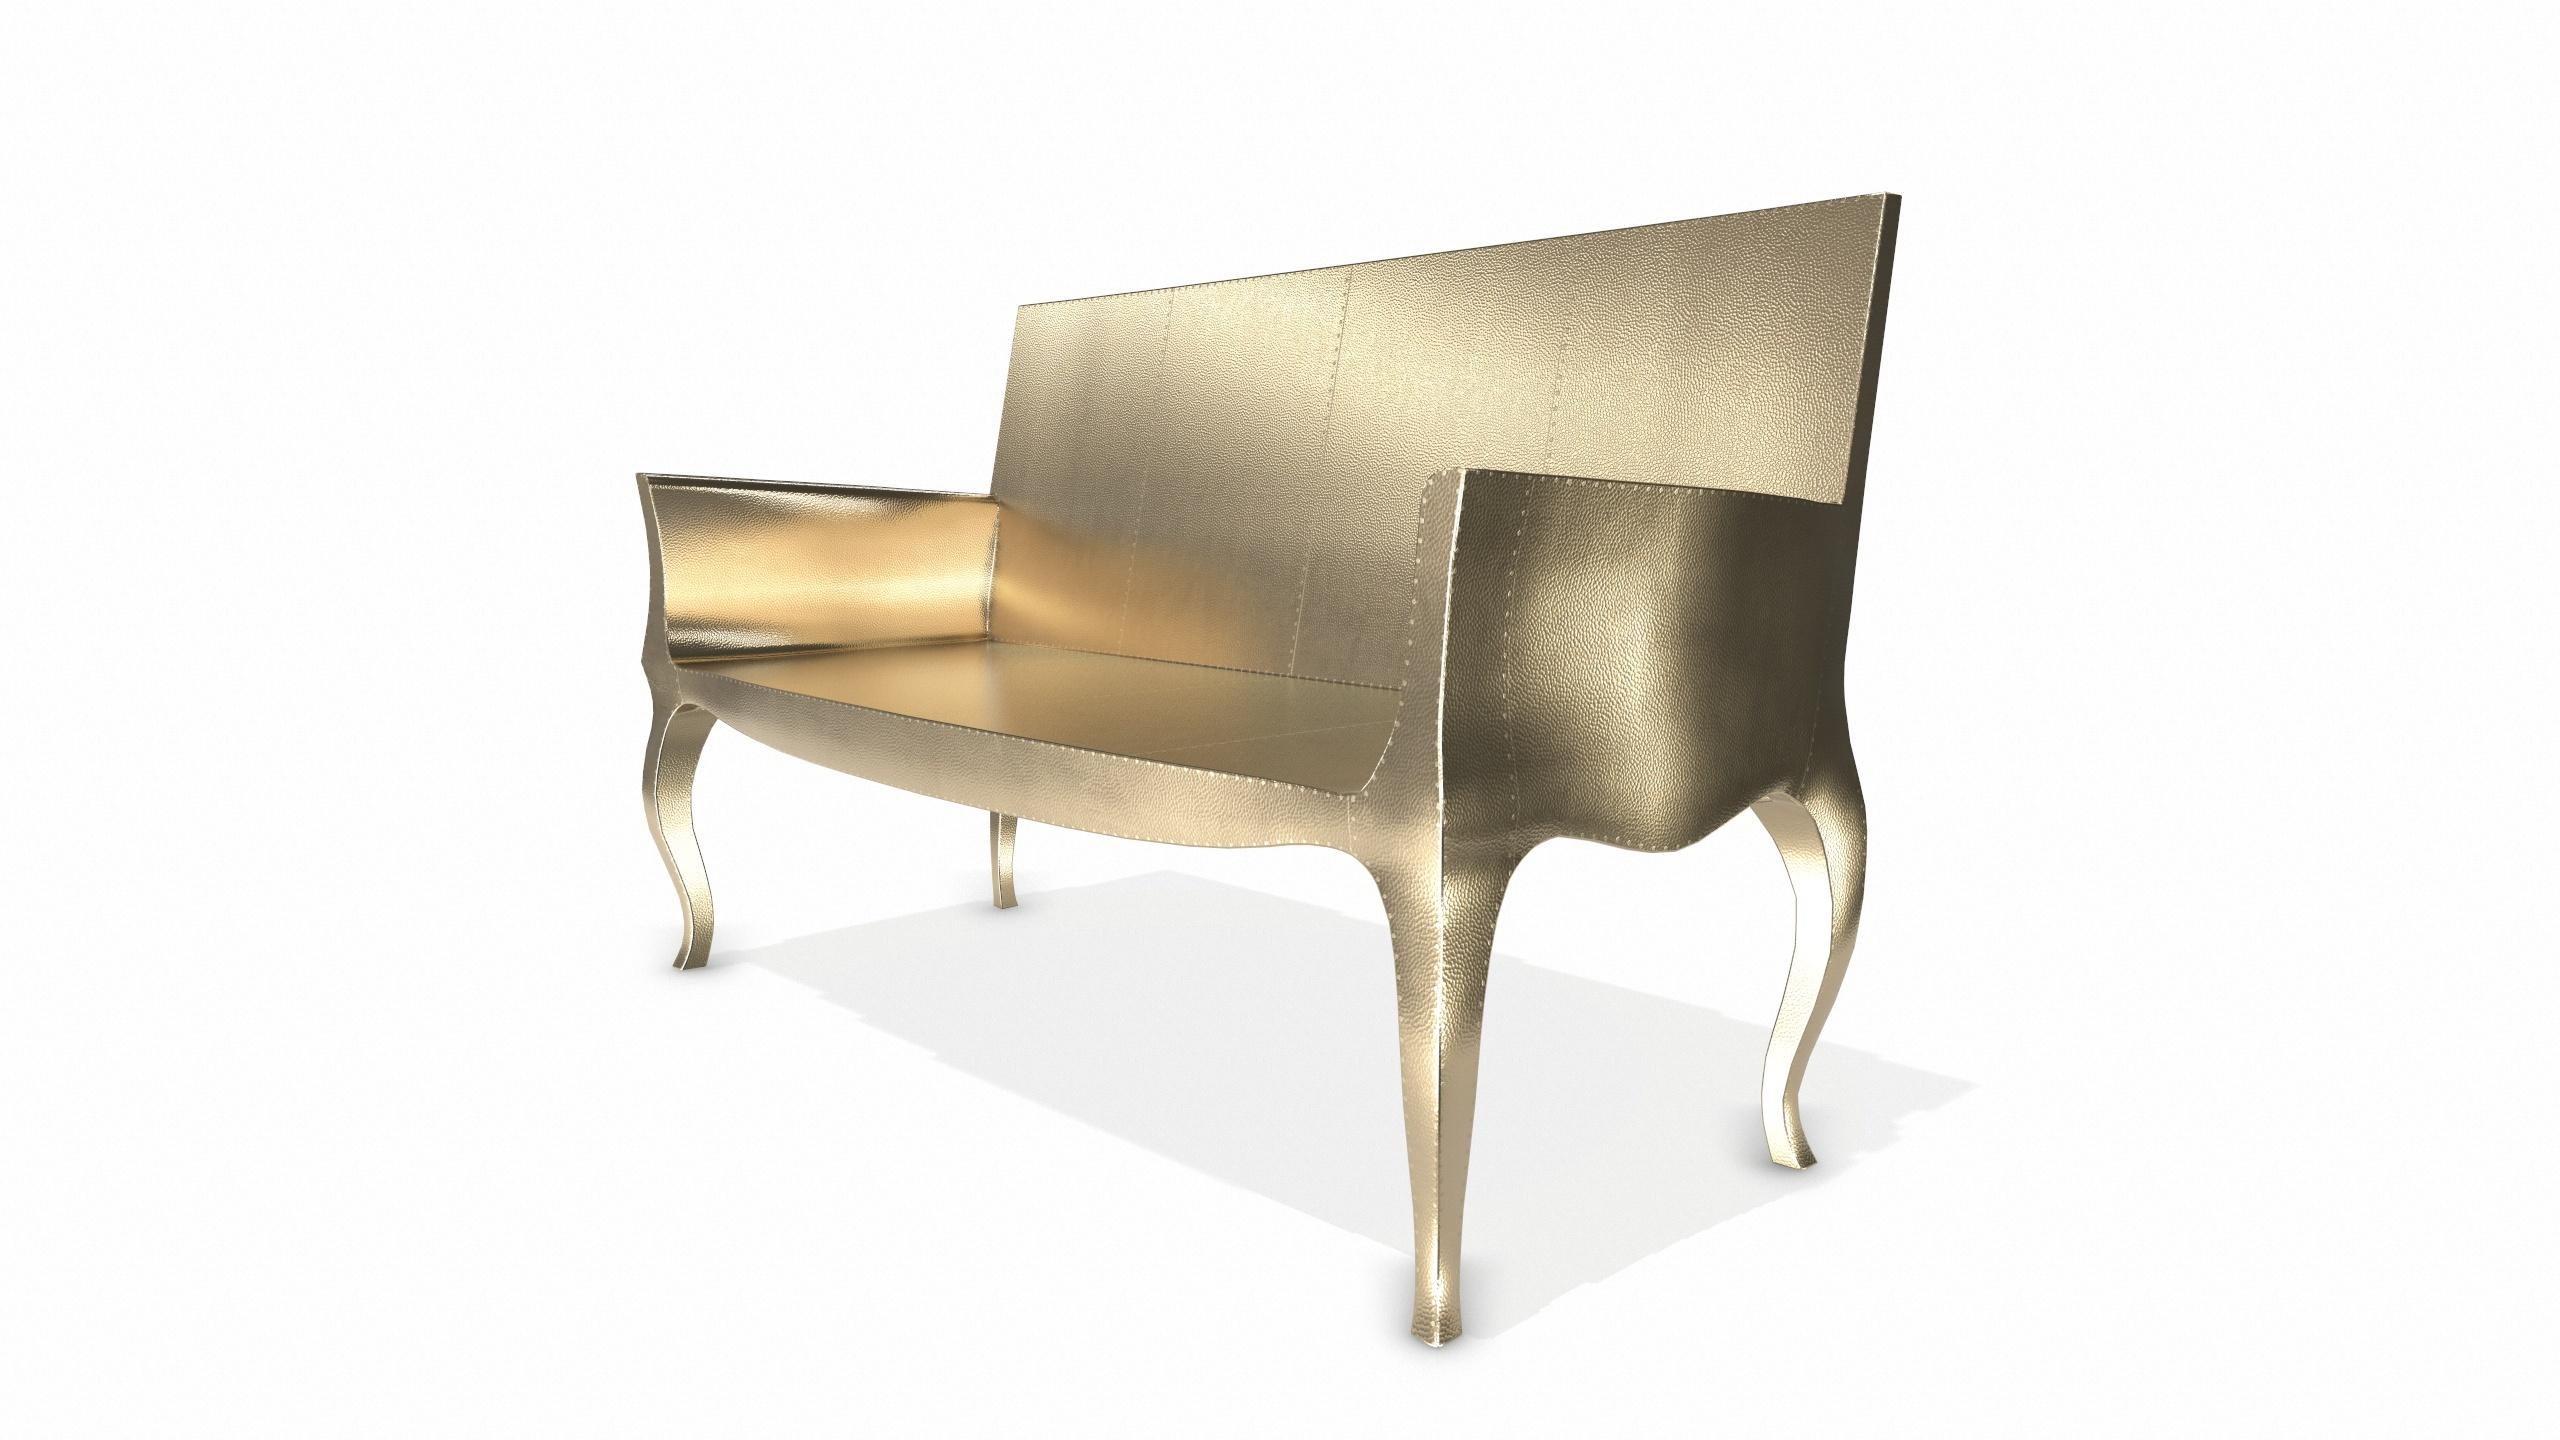 Hand-Crafted Louise Settee Art Deco Chaise Longues in Mid. Hammered Brass by Paul Mathieu For Sale